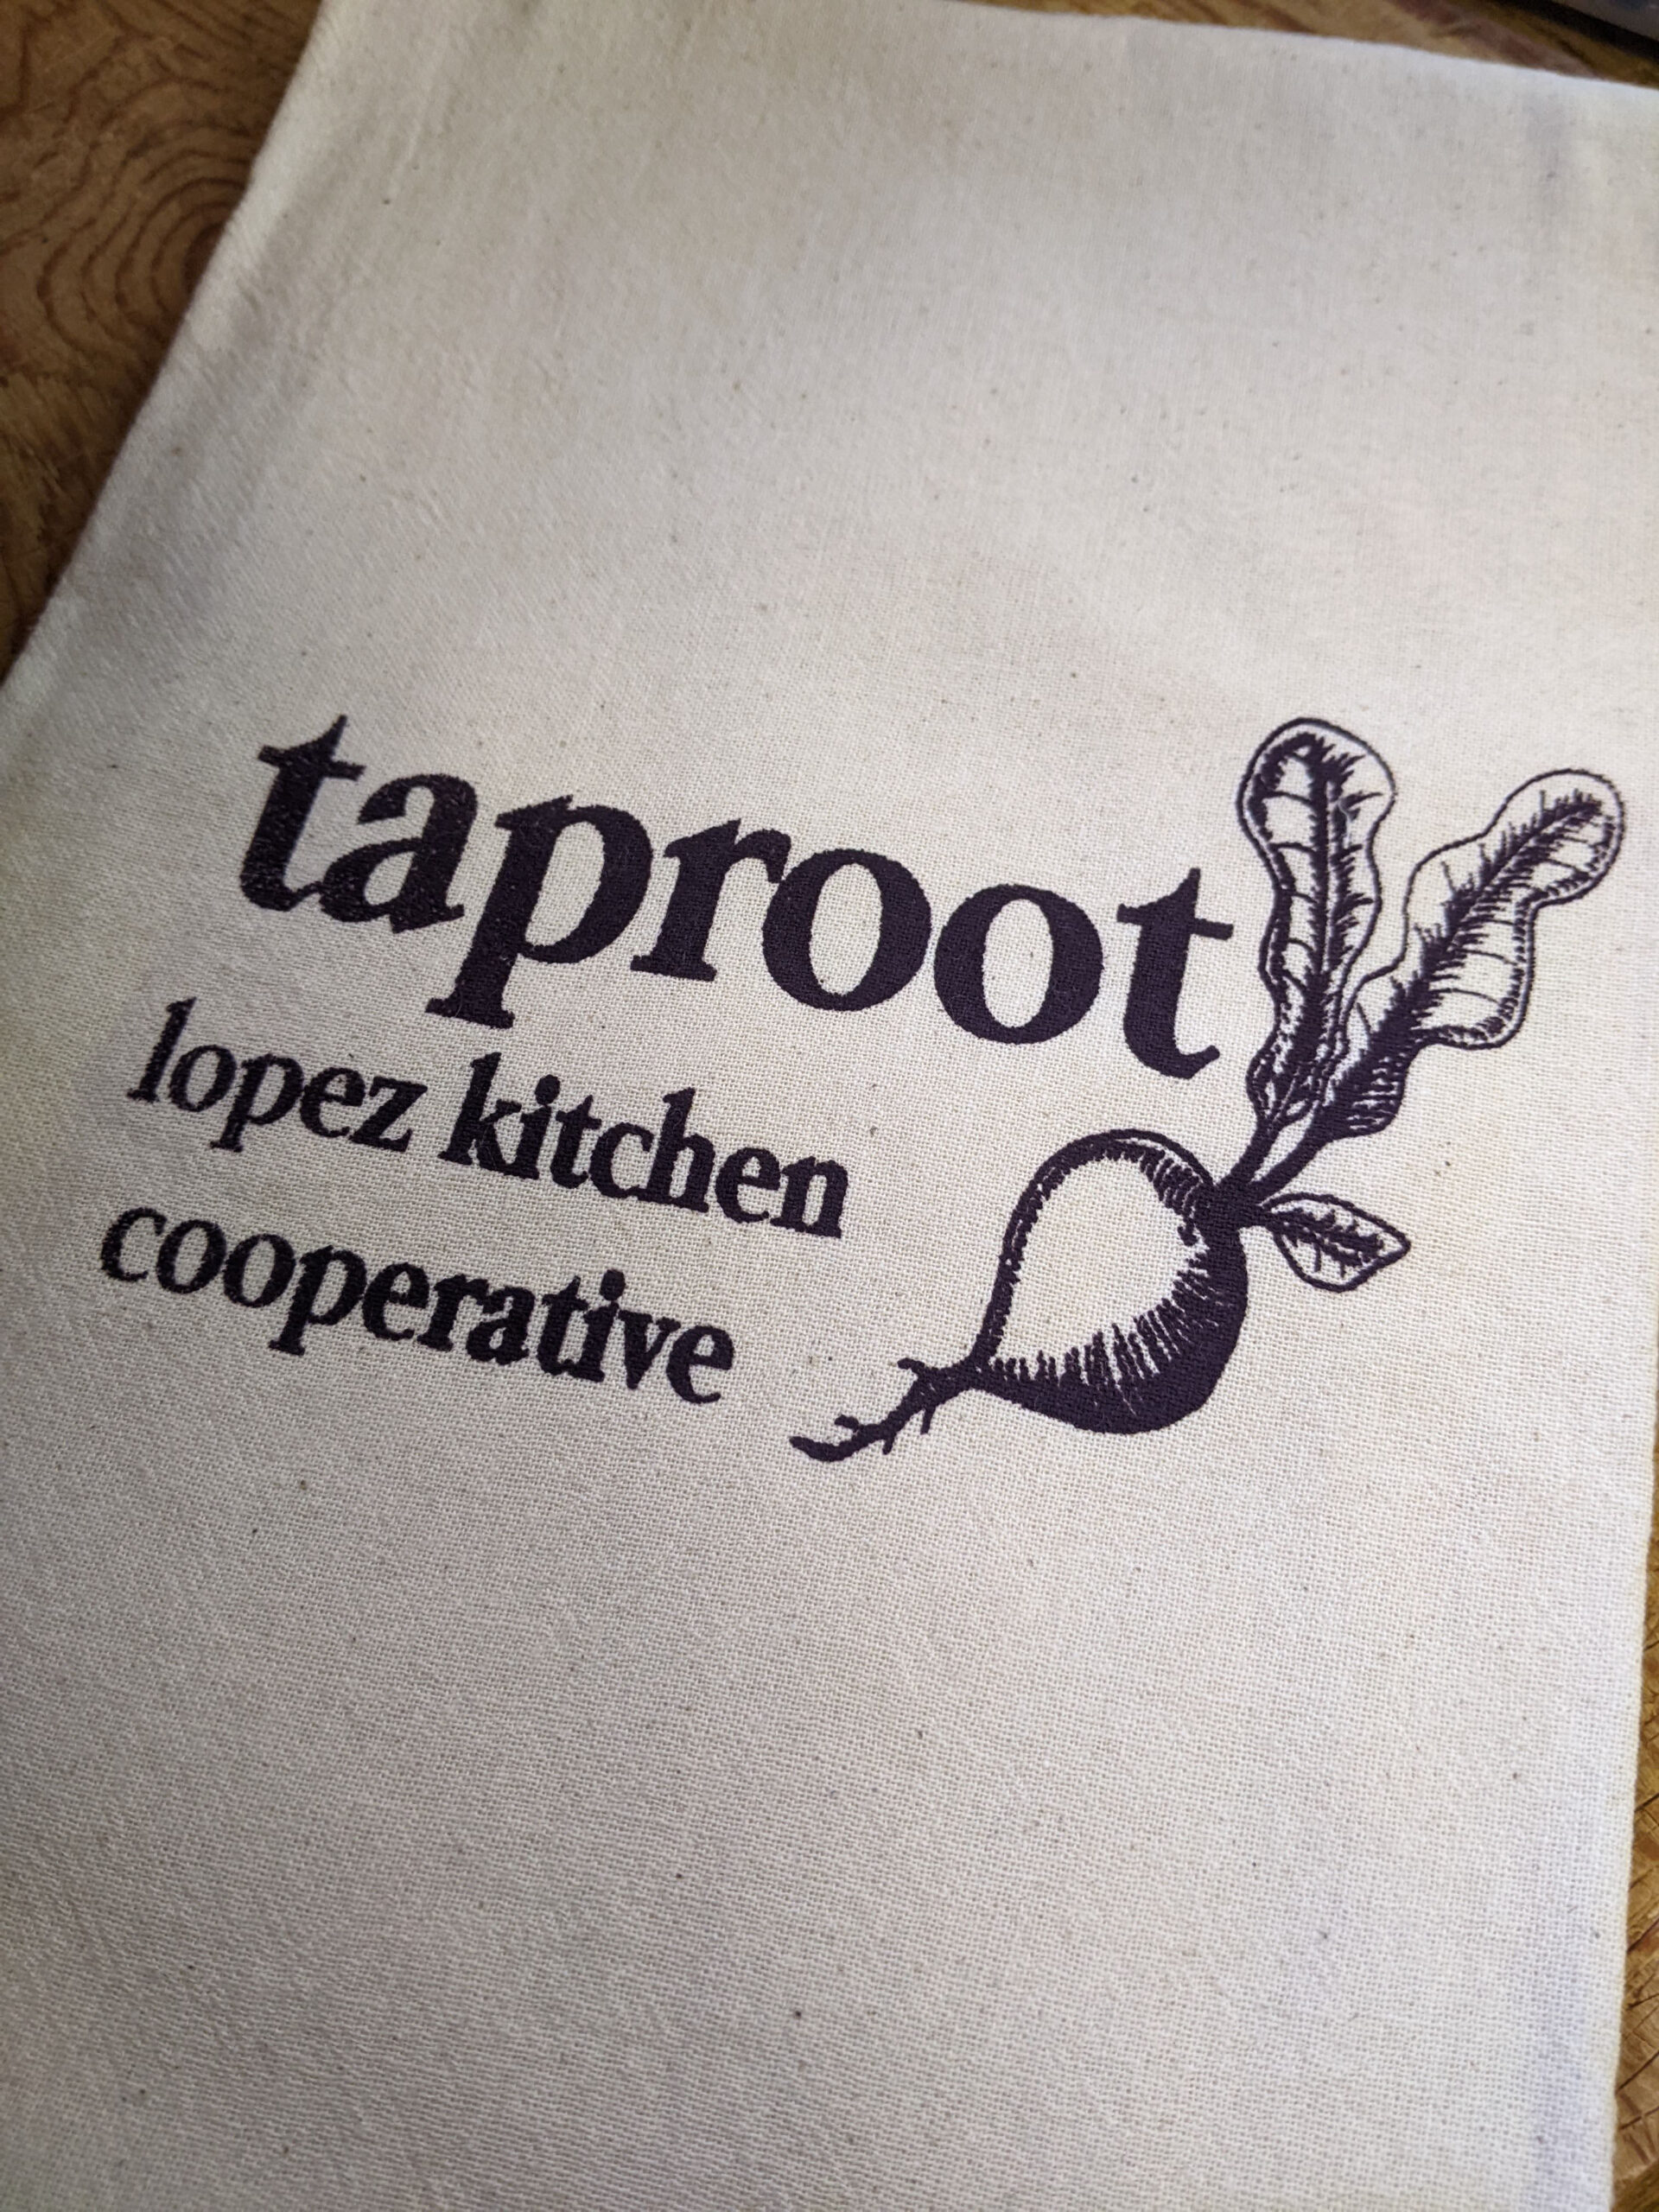 Taproot Expansion Project